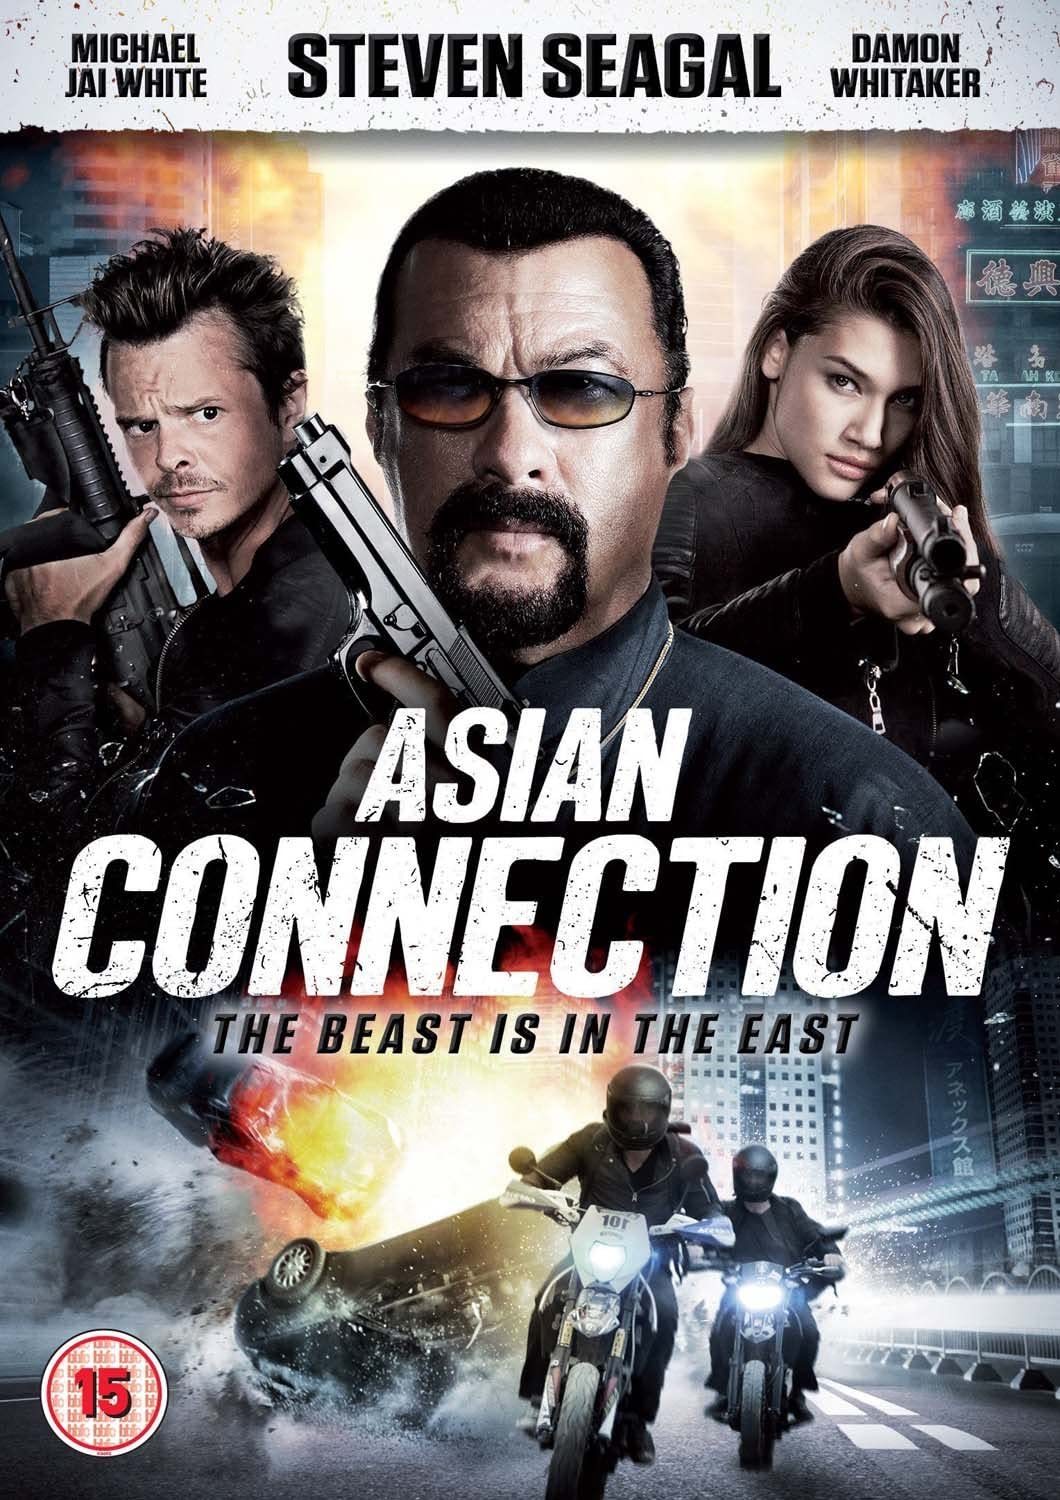 Asian Connection [2016] - Action/Drama [DVD]